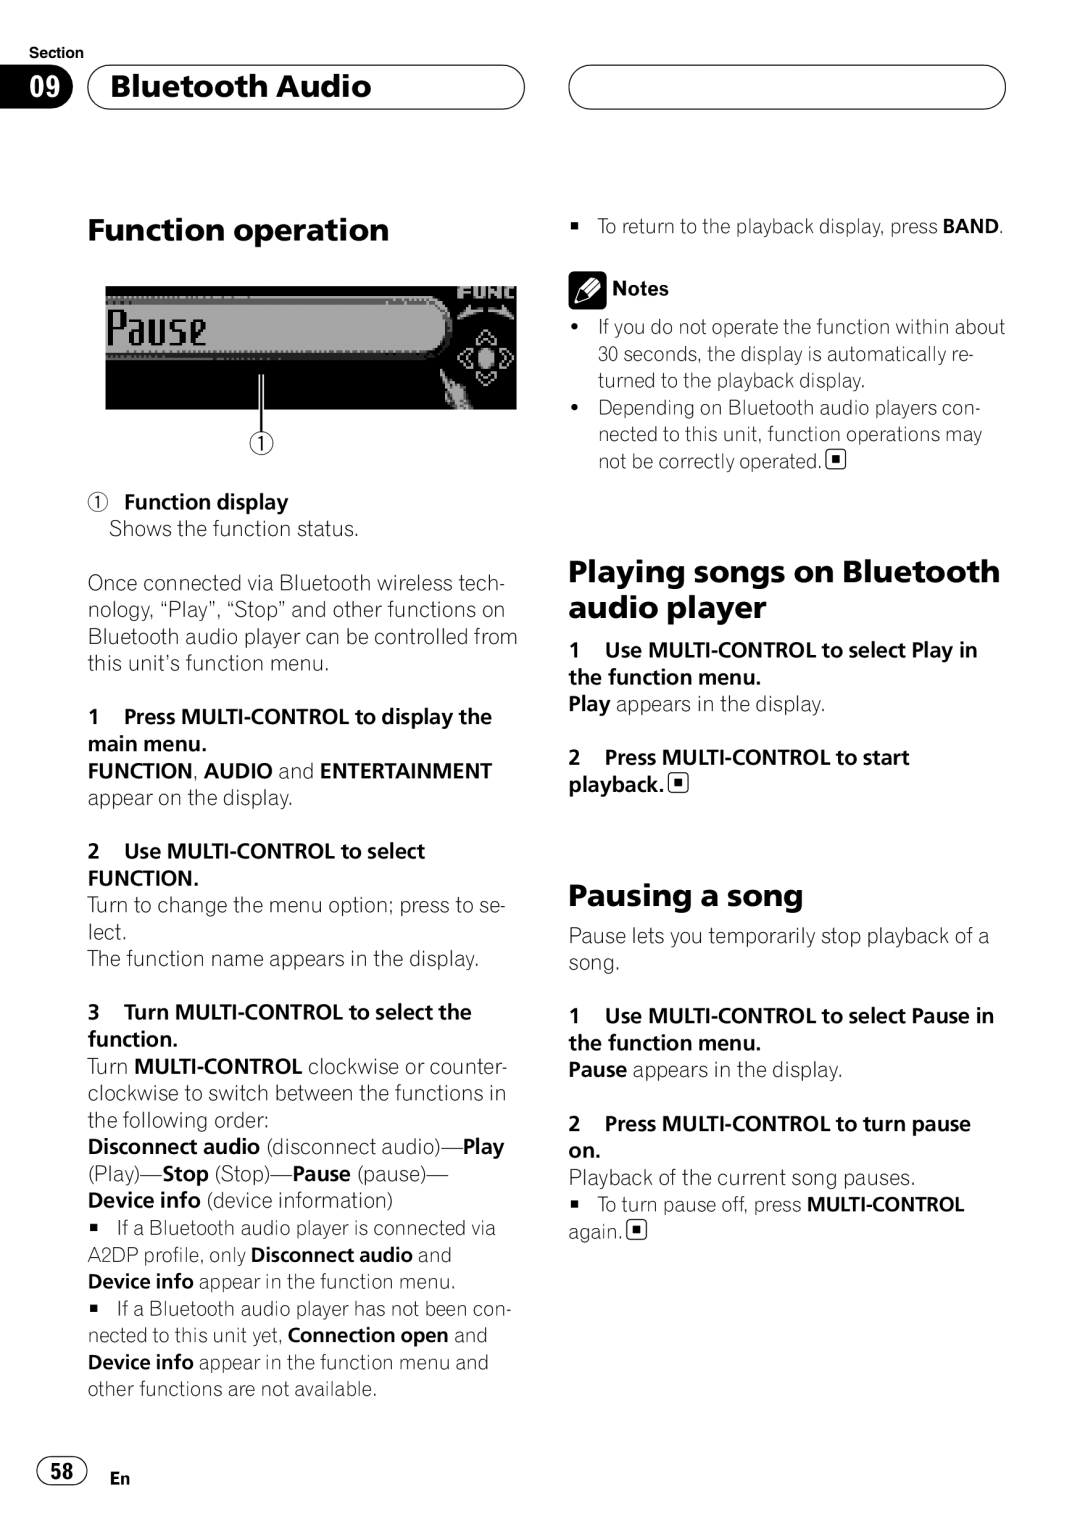 Pioneer DEH-P75BT Bluetooth Audio Function operation, Playing songs on Bluetooth audio player, Pausing a song 